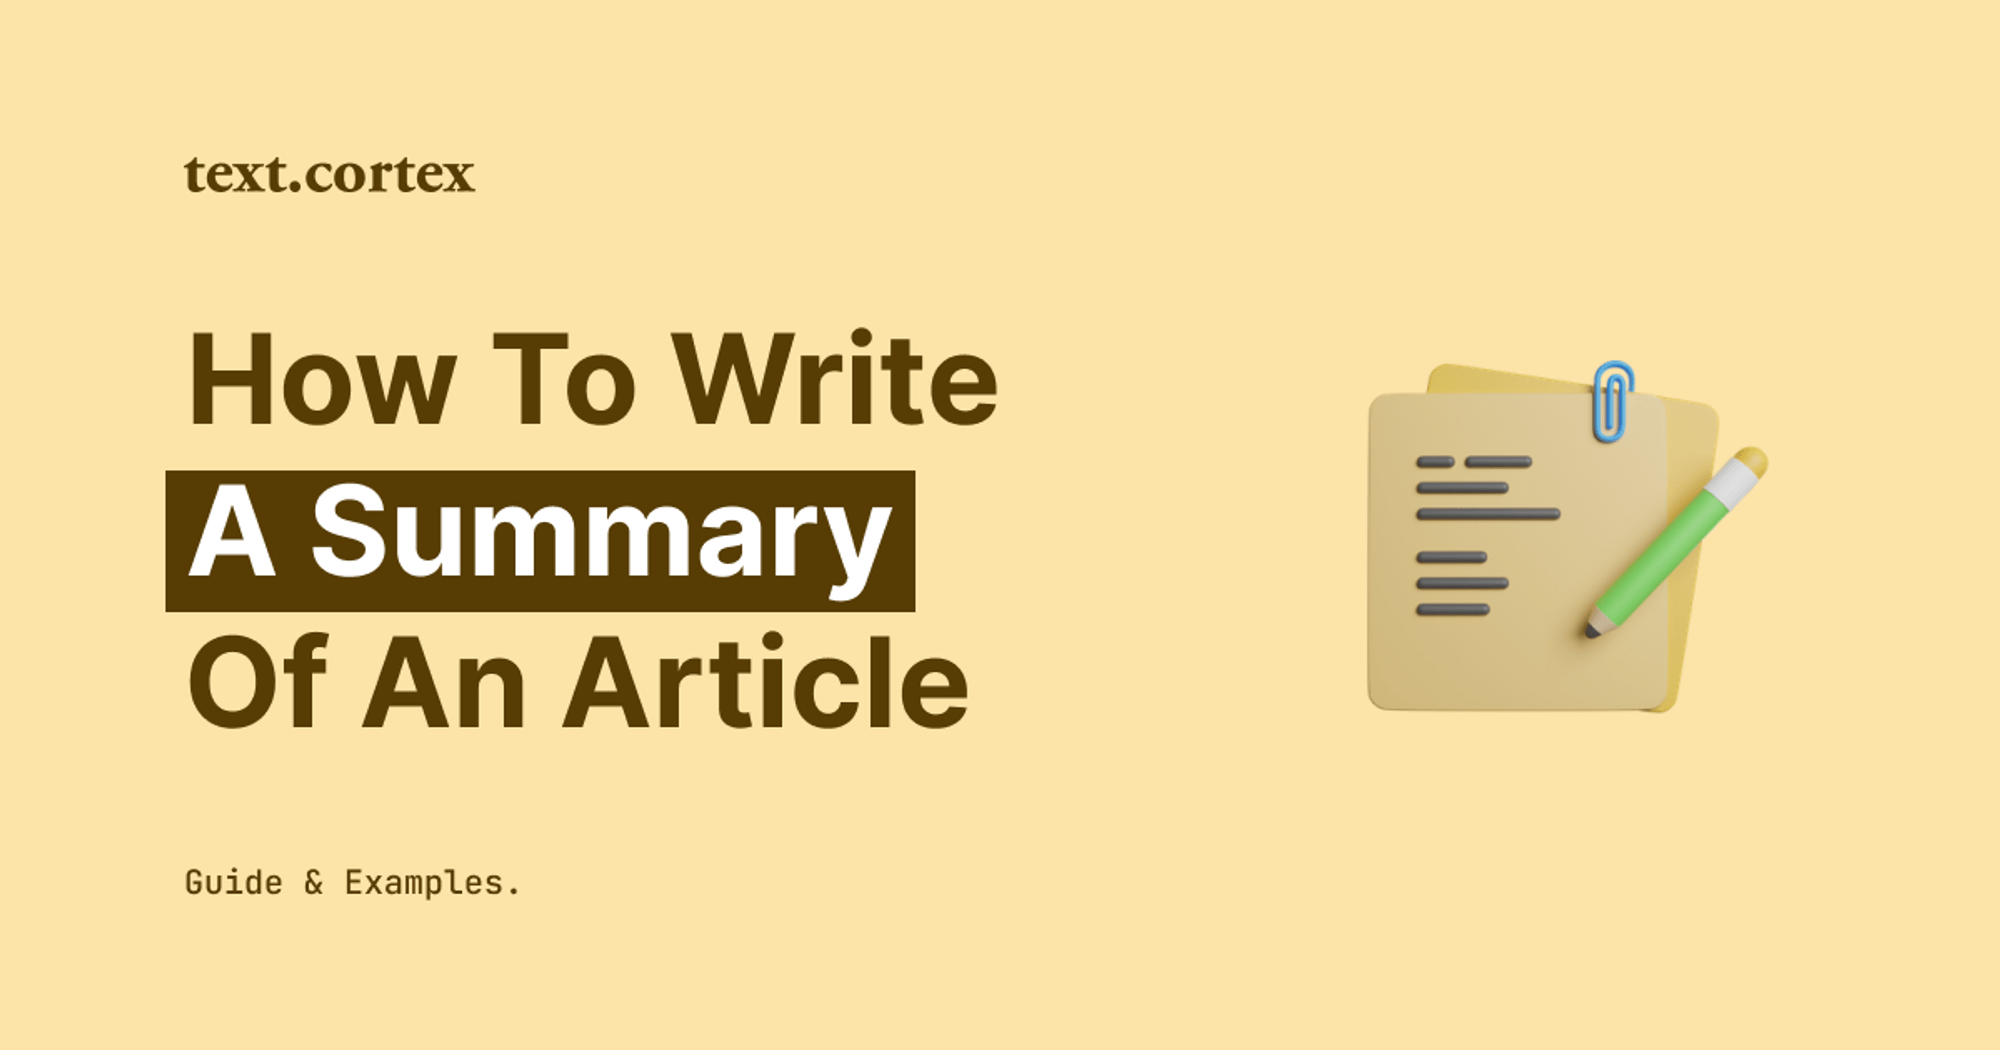 How To Write a Summary of an Article - Guide & Examples